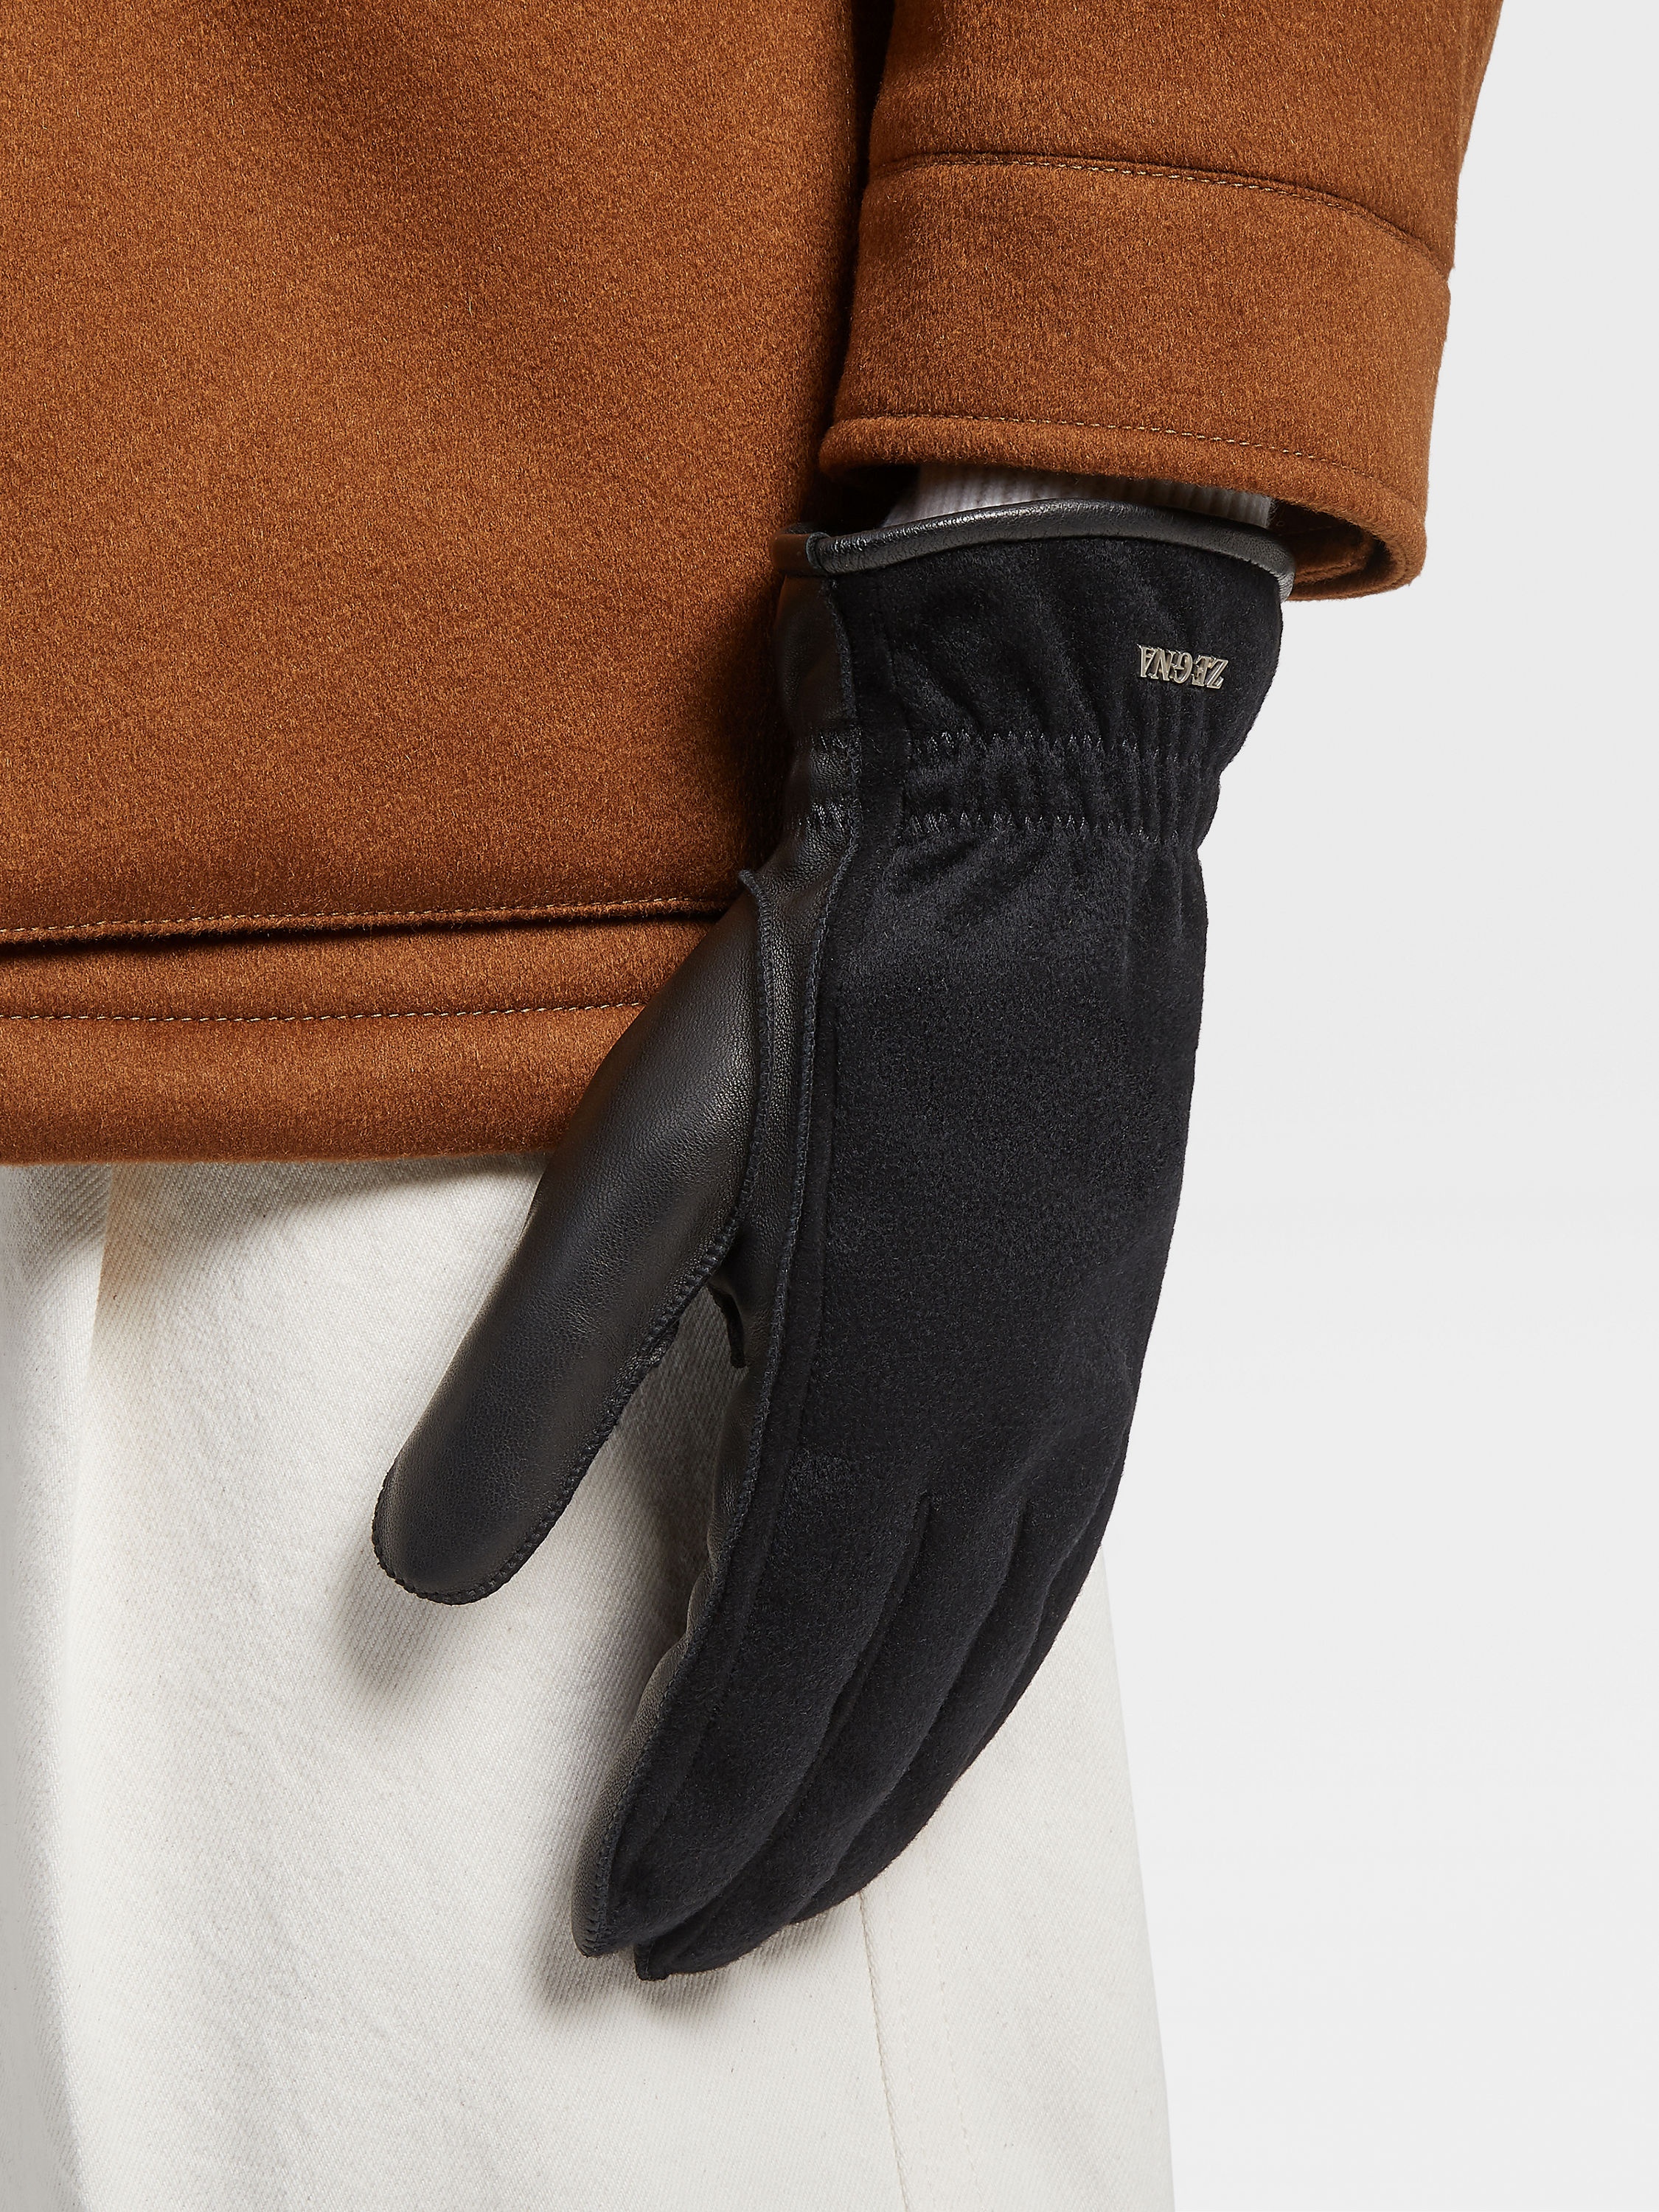 BLACK OASI CASHMERE AND LEATHER GLOVES - 3